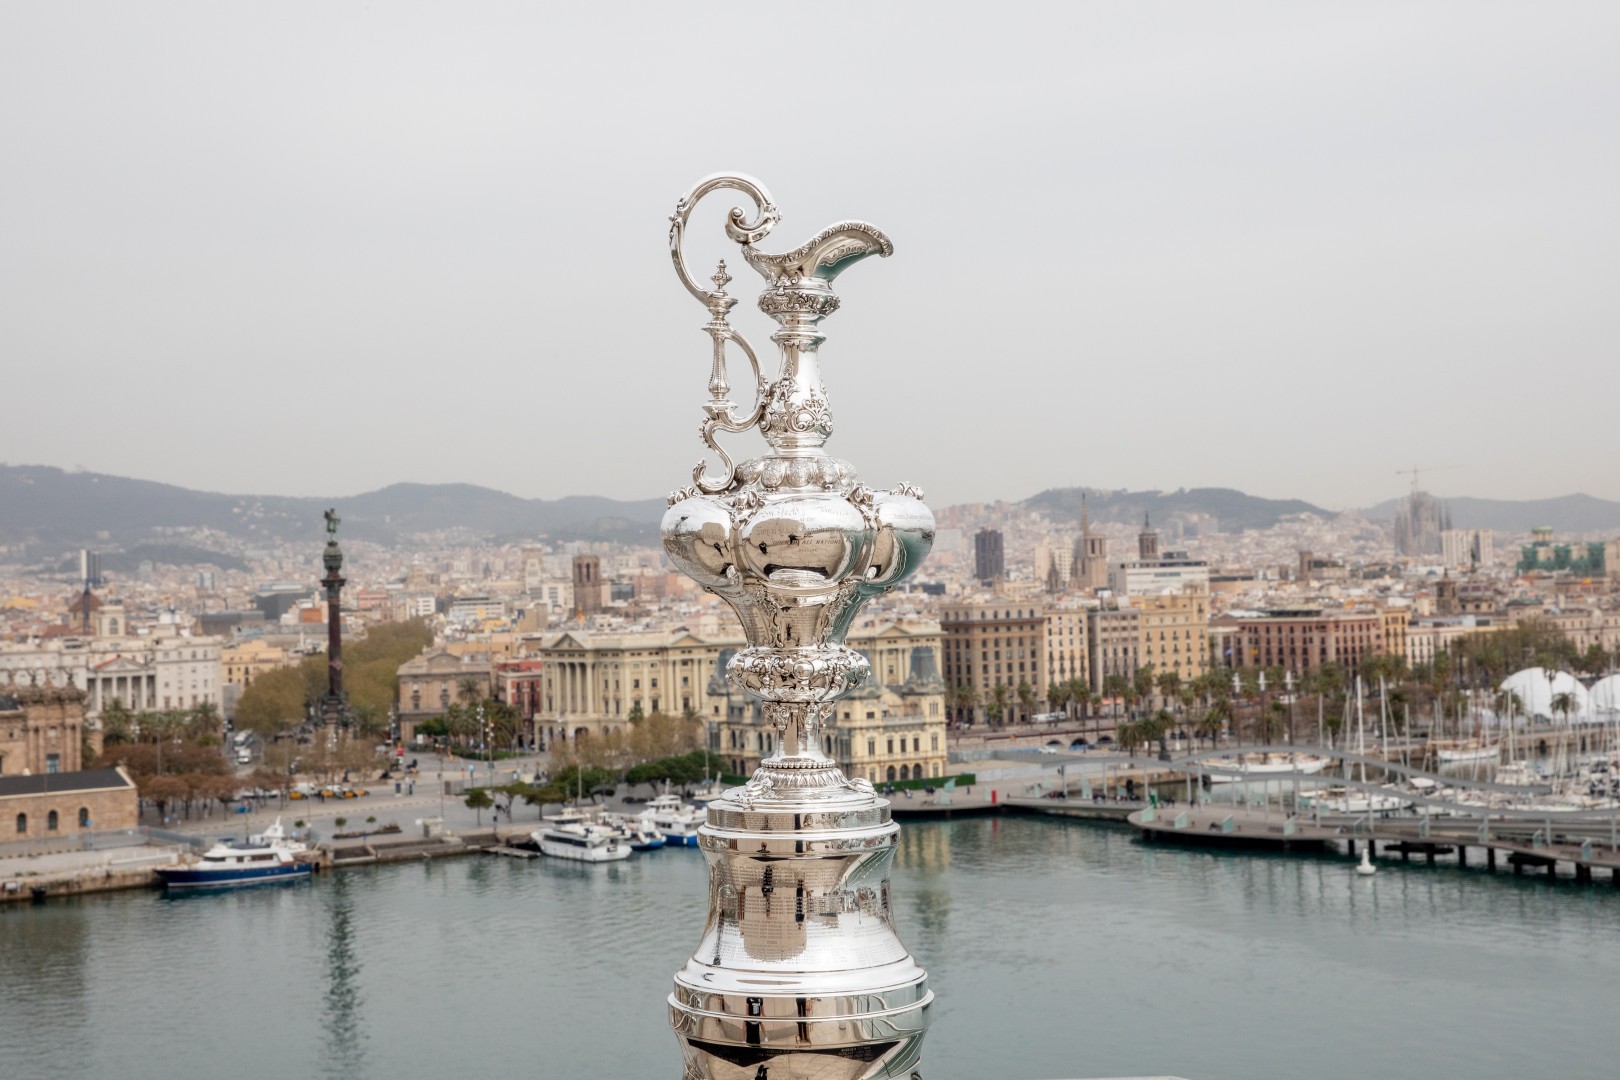 Barcelona, the Host Venue for the 37th America's Cup in 2024